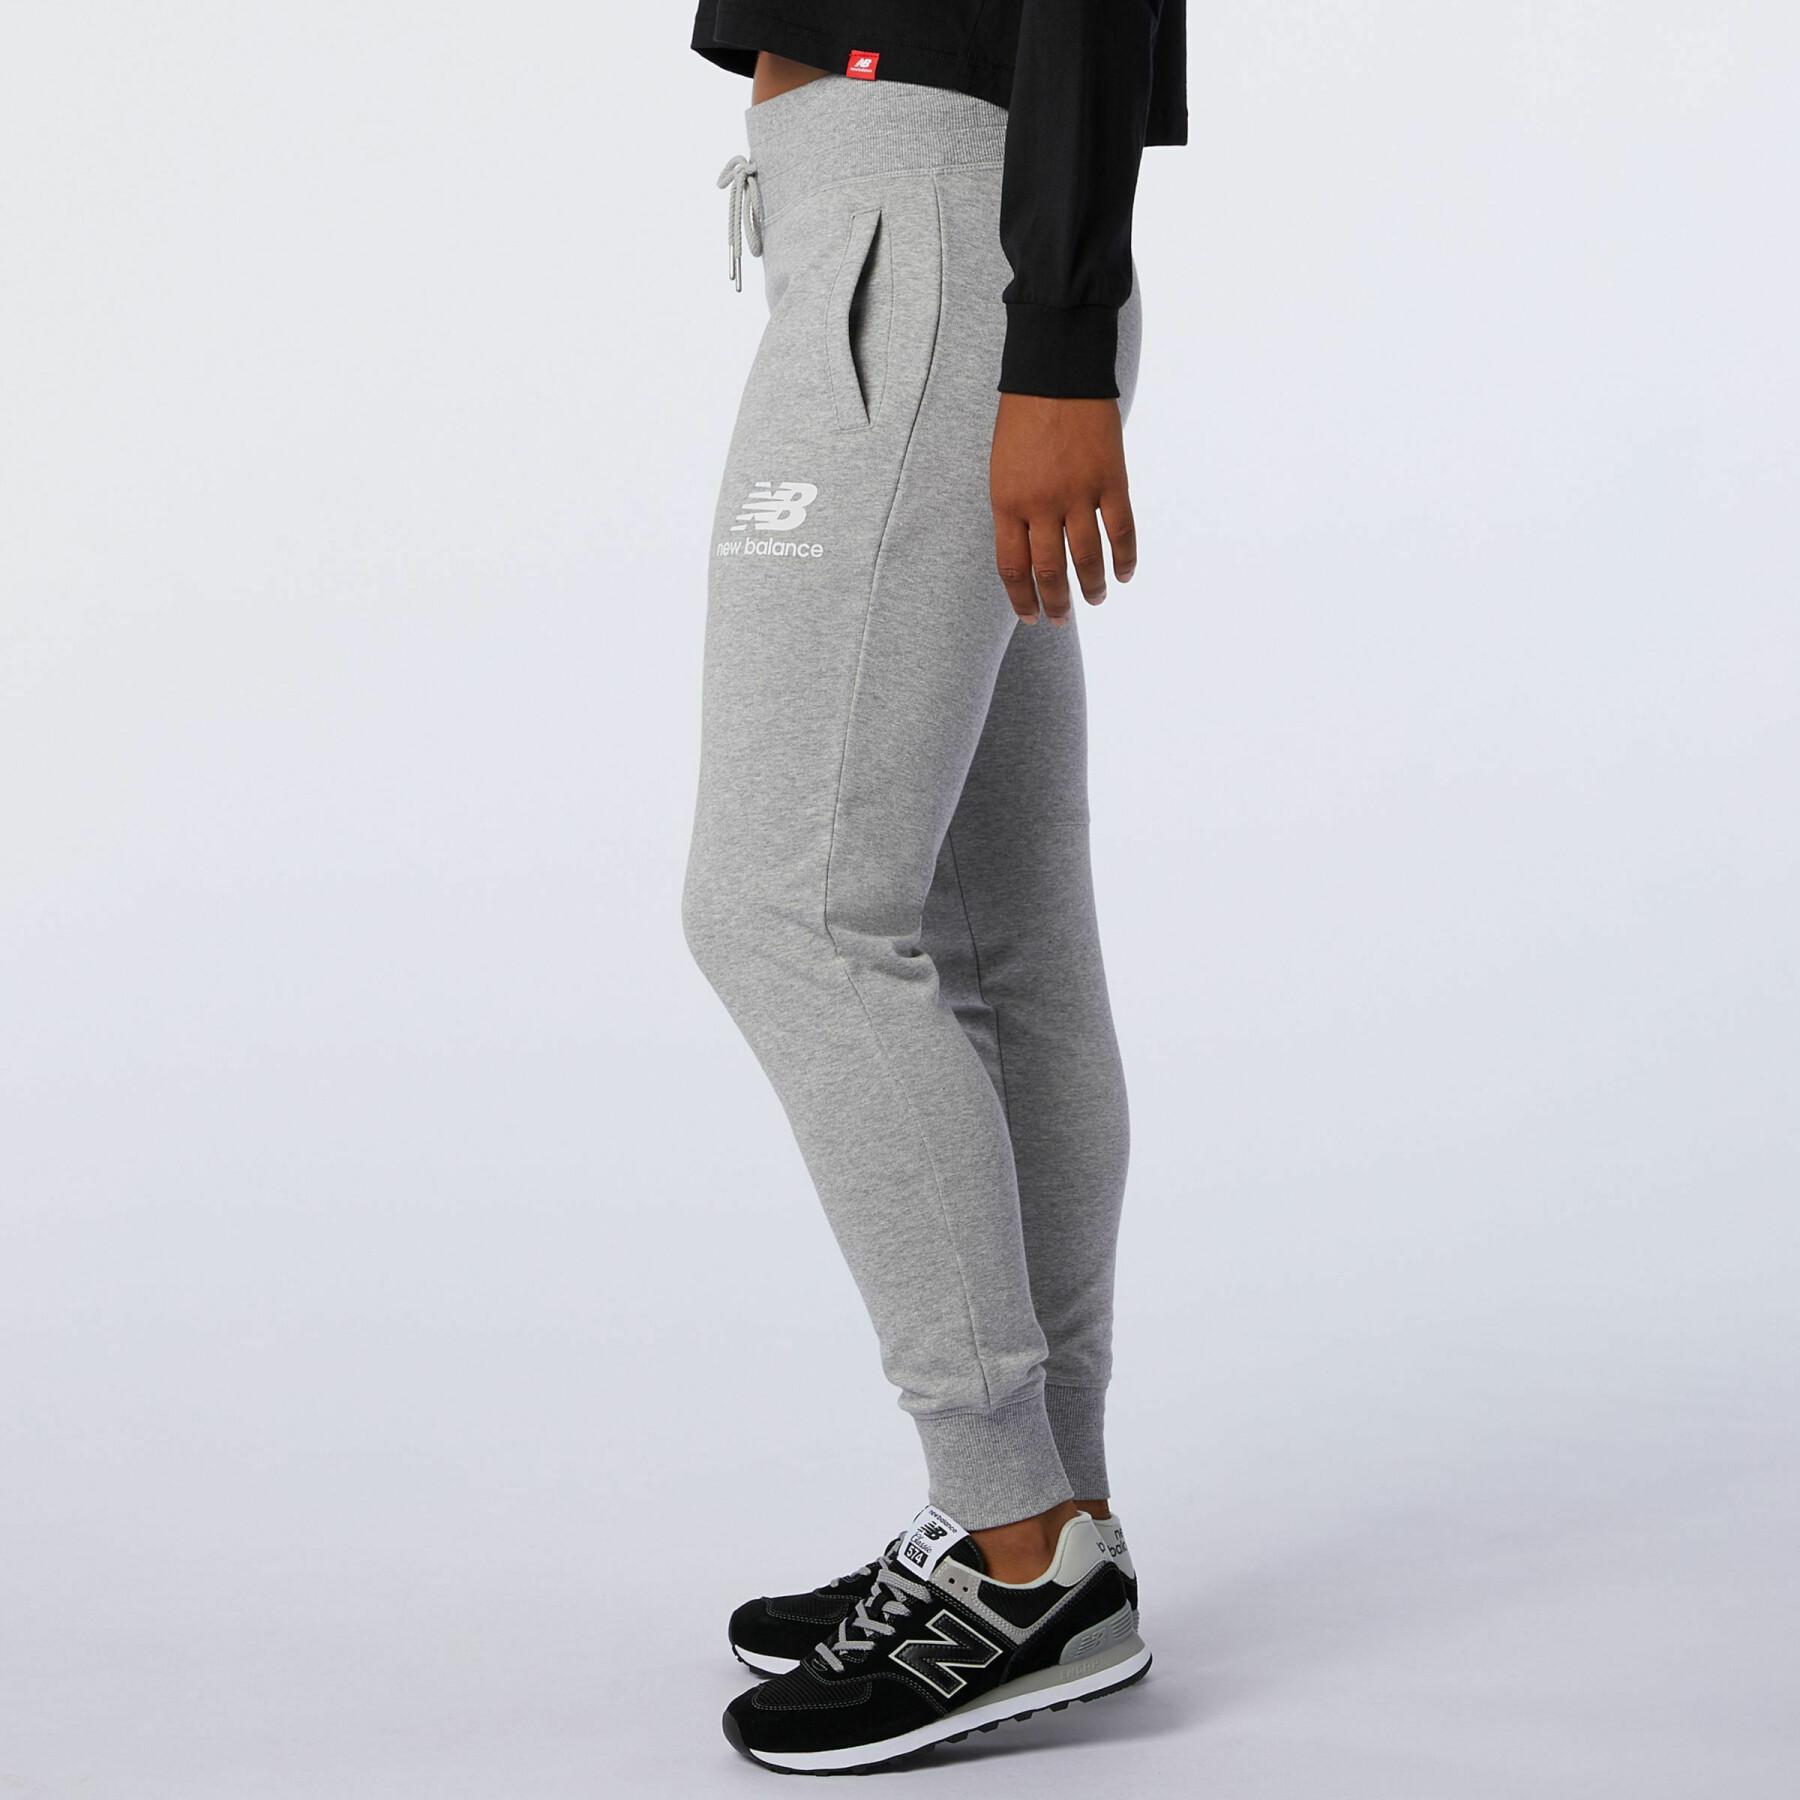 Women's trousers New Balance essentials french terry